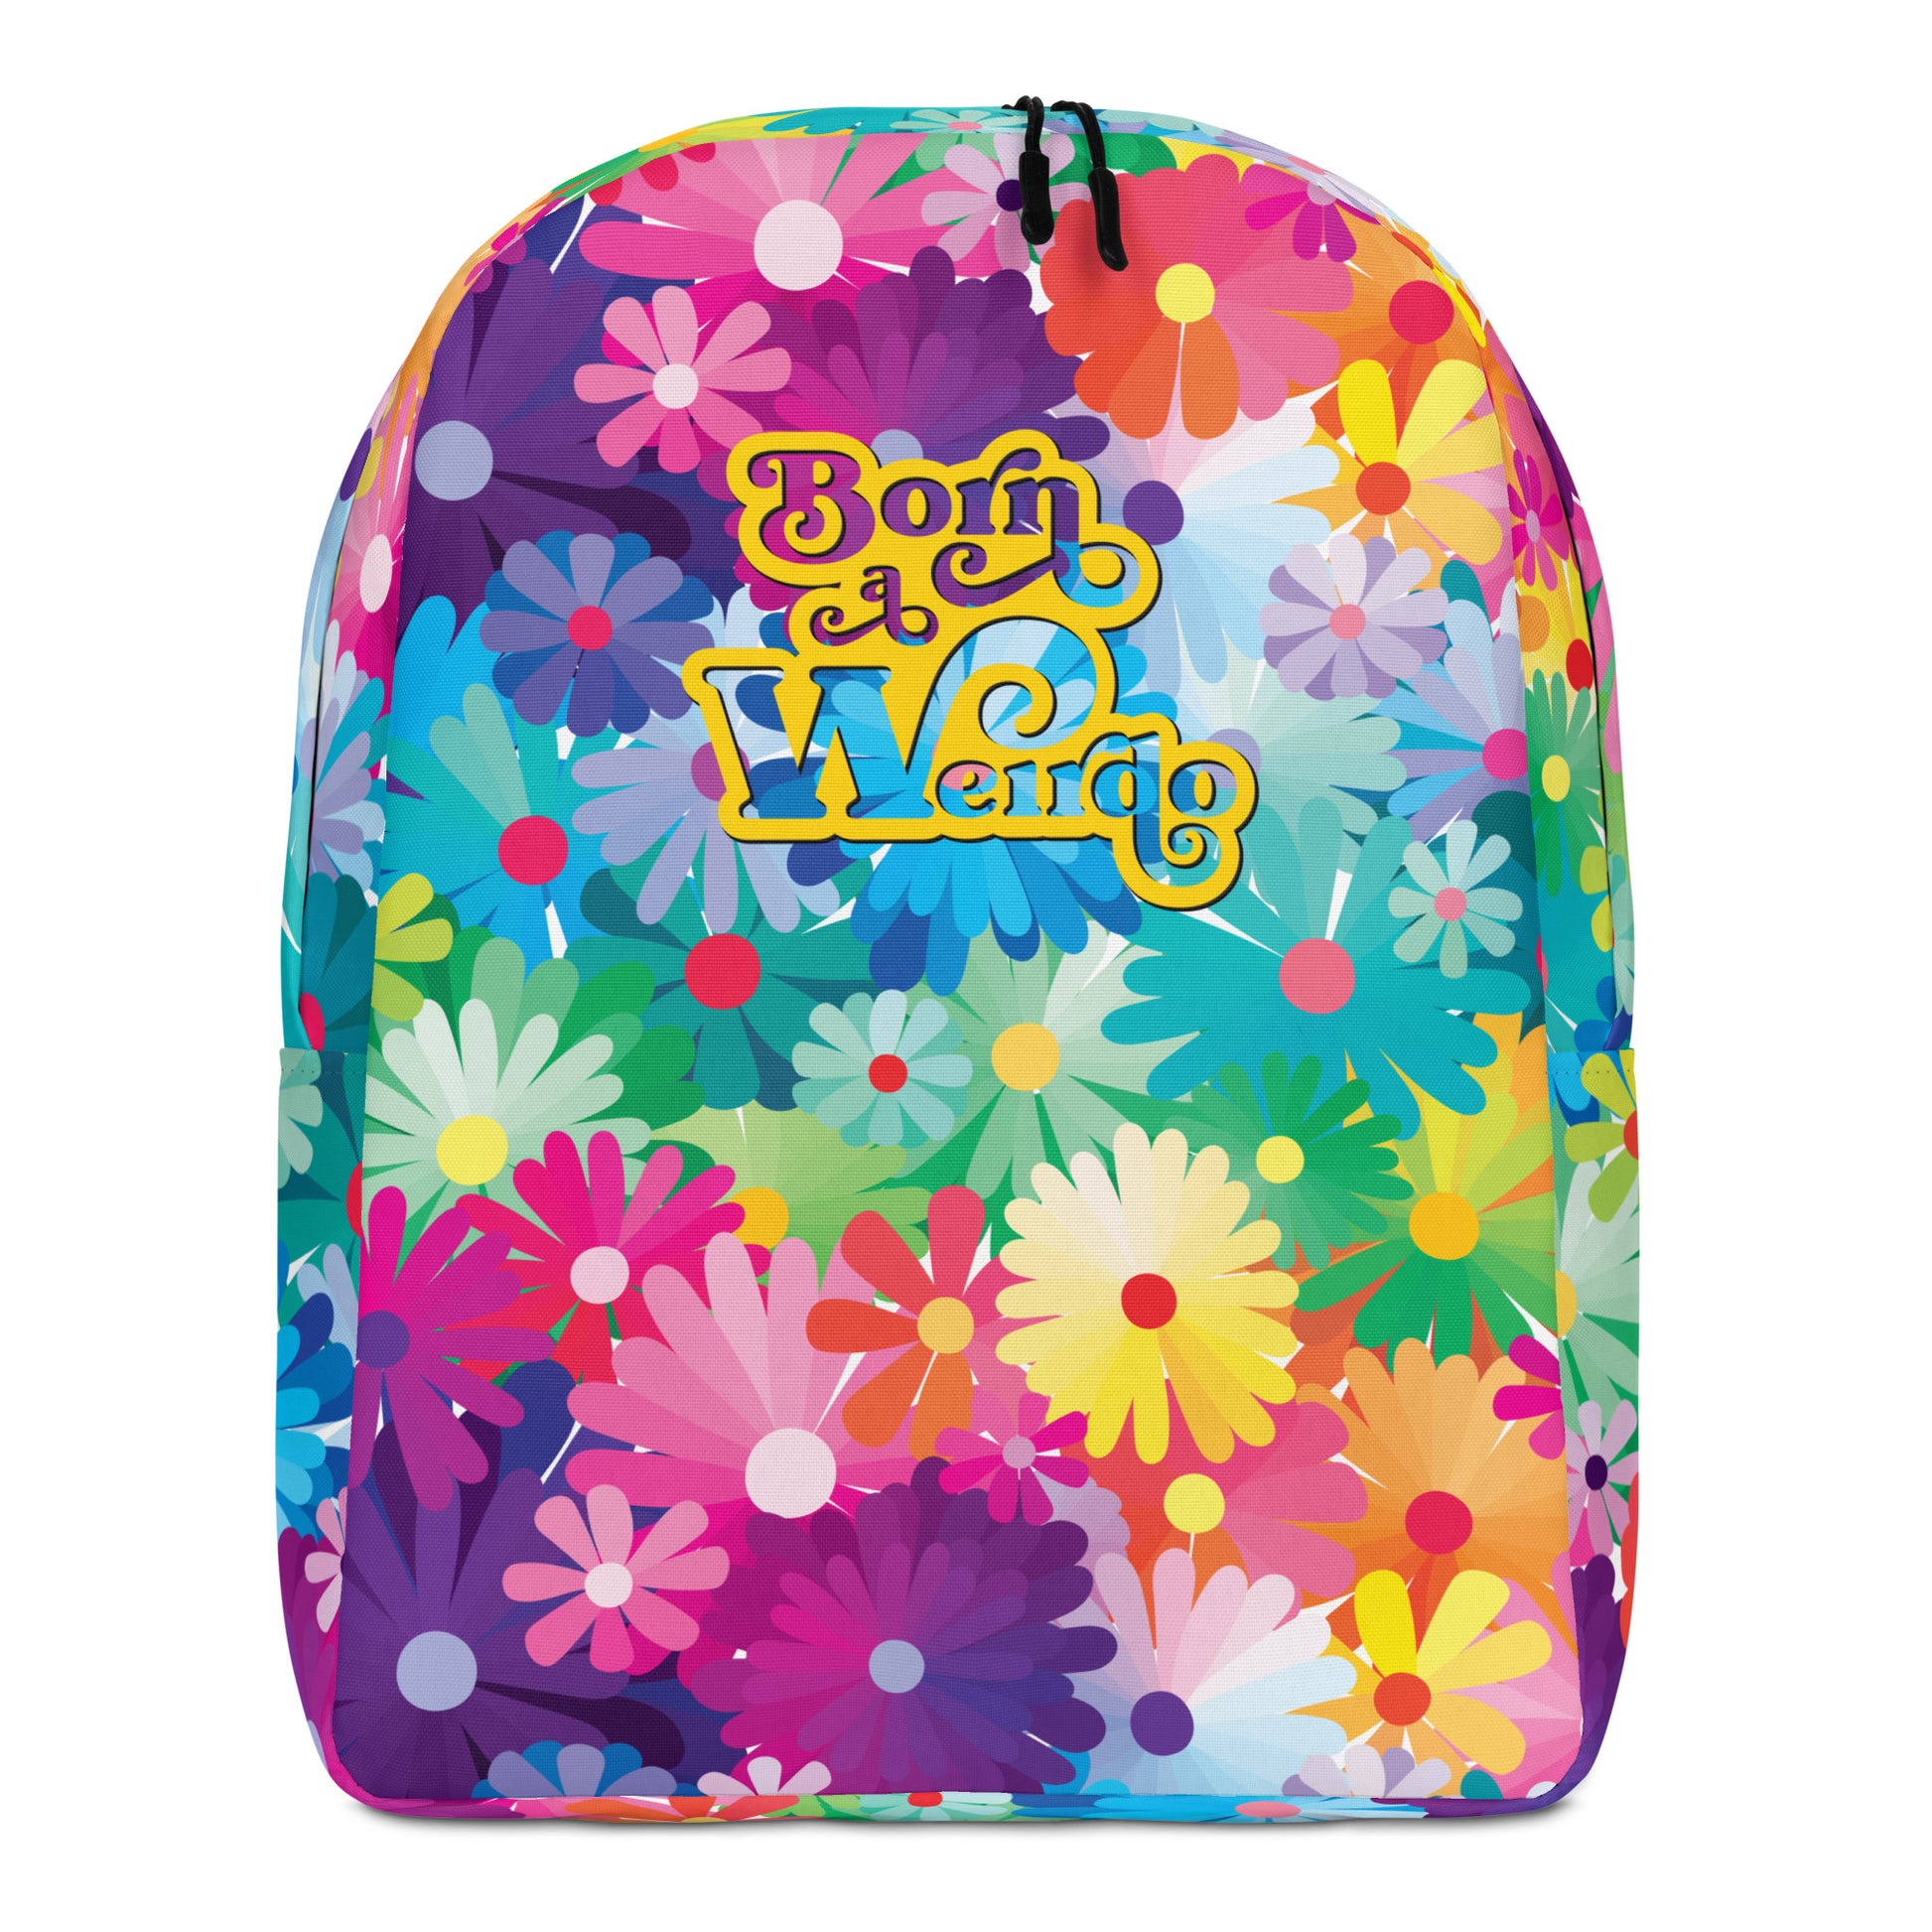 #WEIRDO | This colourful minimalistic backpack is specially made for you weirdos who are born this way! Flowers are printed all over this backpack and our fun meme is at the front of the minimalist backpack: Born a Weirdo.